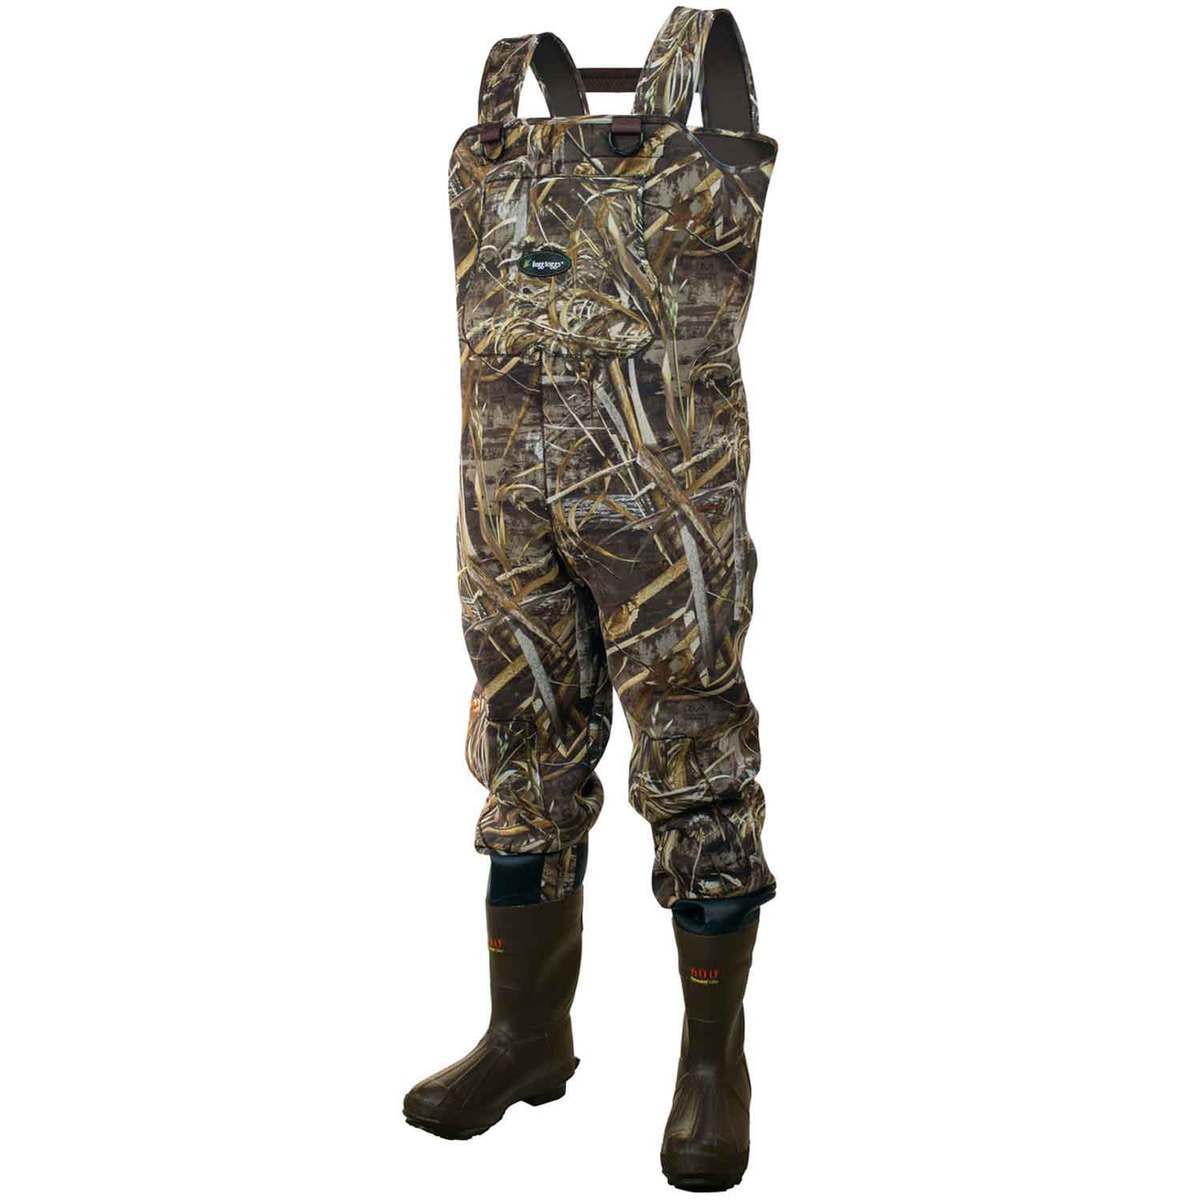 Frogg Toggs Amphib Neoprene Cleated Bootfoot Chest Waders – Tackle World